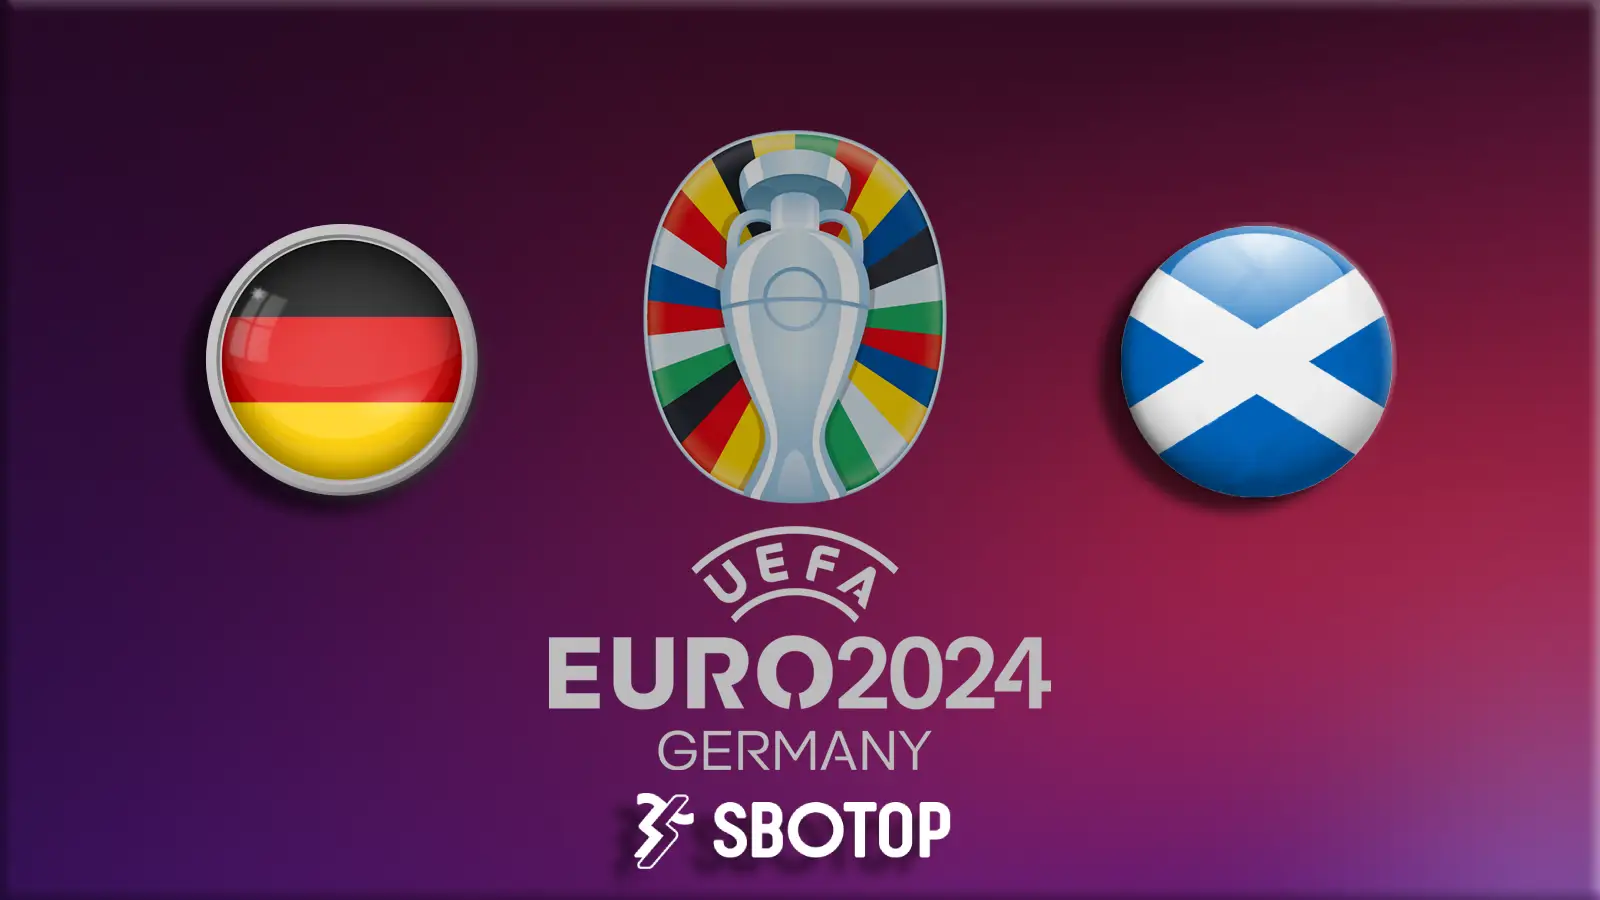  The image shows the flags of Germany and Scotland with the UEFA Euro 2024 logo in the middle. The text at the bottom reads "Germany 5-1 Scotland".